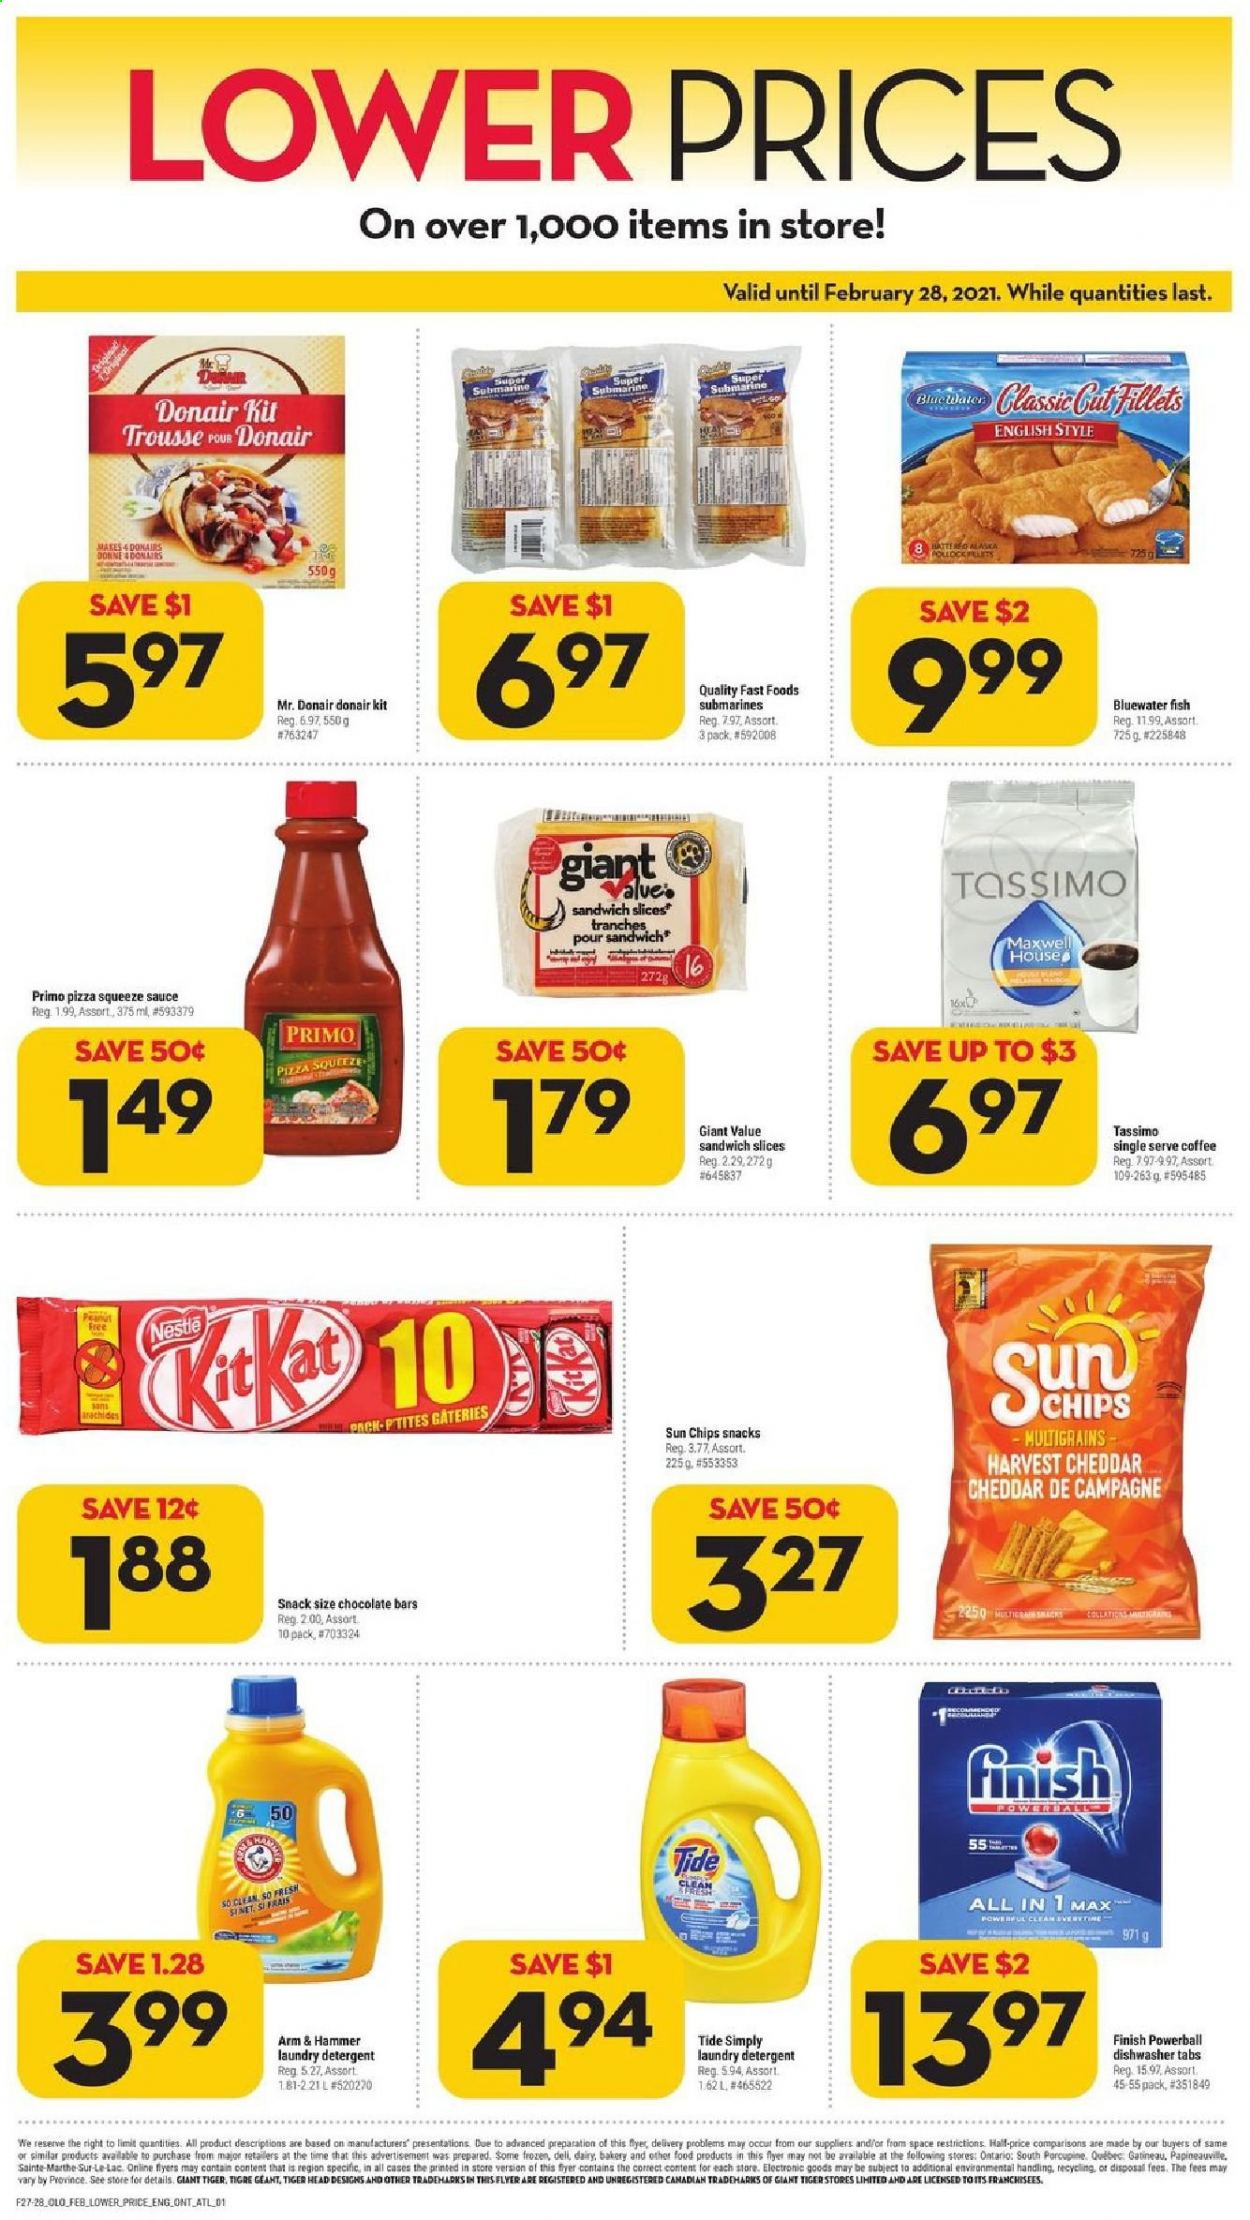 thumbnail - Giant Tiger Flyer - February 10, 2021 - February 16, 2021 - Sales products - fish, pizza, sandwich, sauce, sandwich slices, snack, chocolate bar, ARM & HAMMER, coffee, Tide, laundry detergent, Finish Powerball, dishwasher, Nestlé. Page 3.